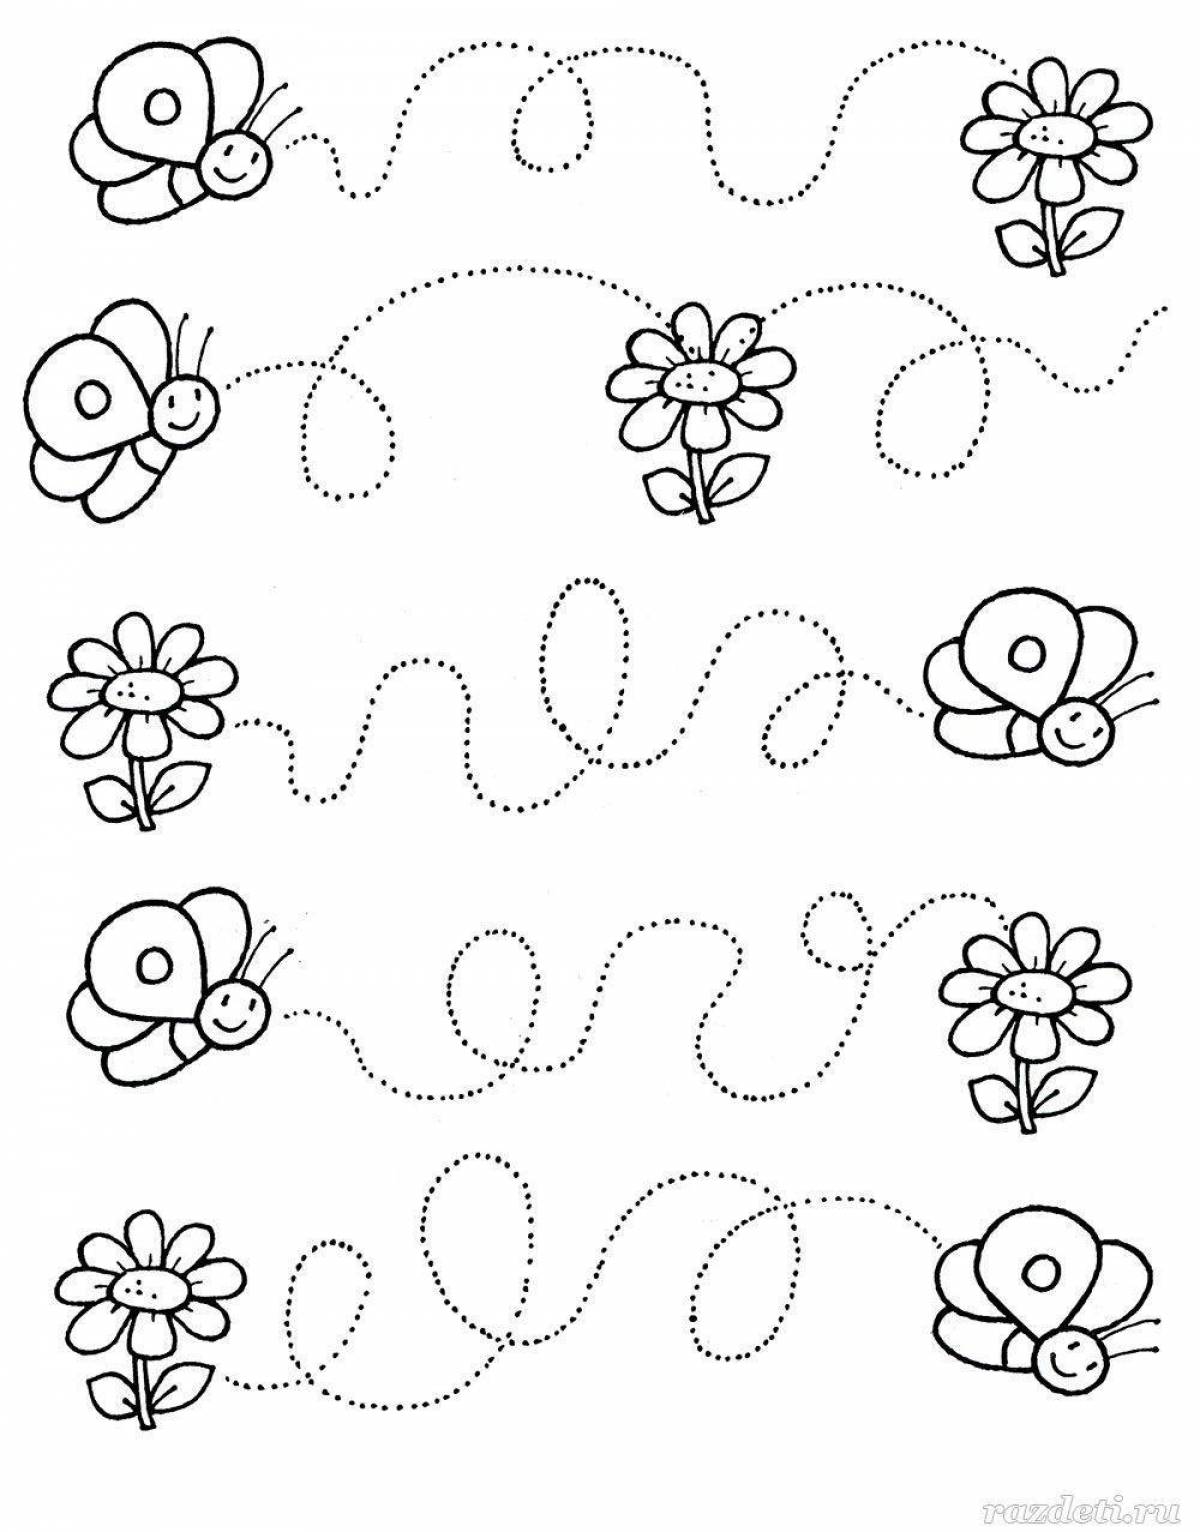 Interactive coloring game for 3-4 year olds